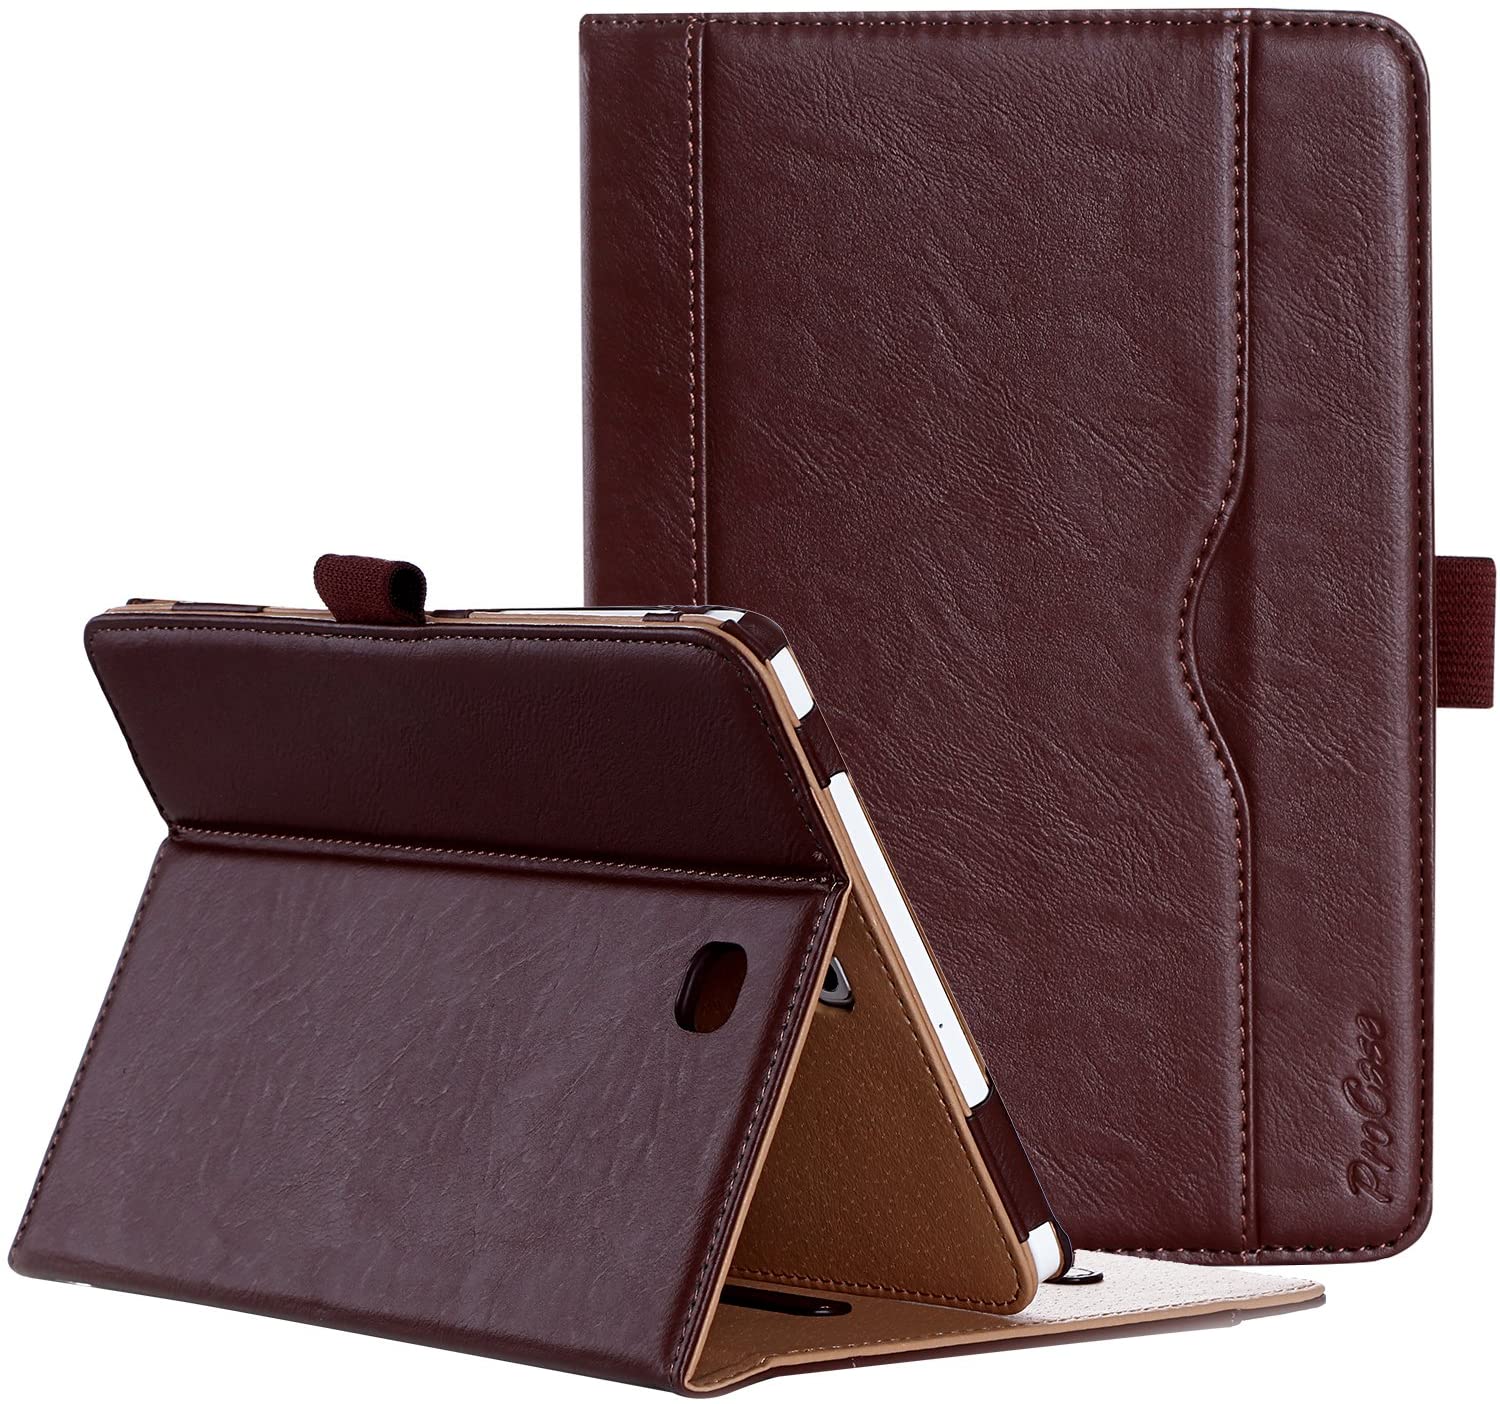 ProCase Samsung Galaxy Tab S2 8.0 Old Model Case  -Brown - e4cents